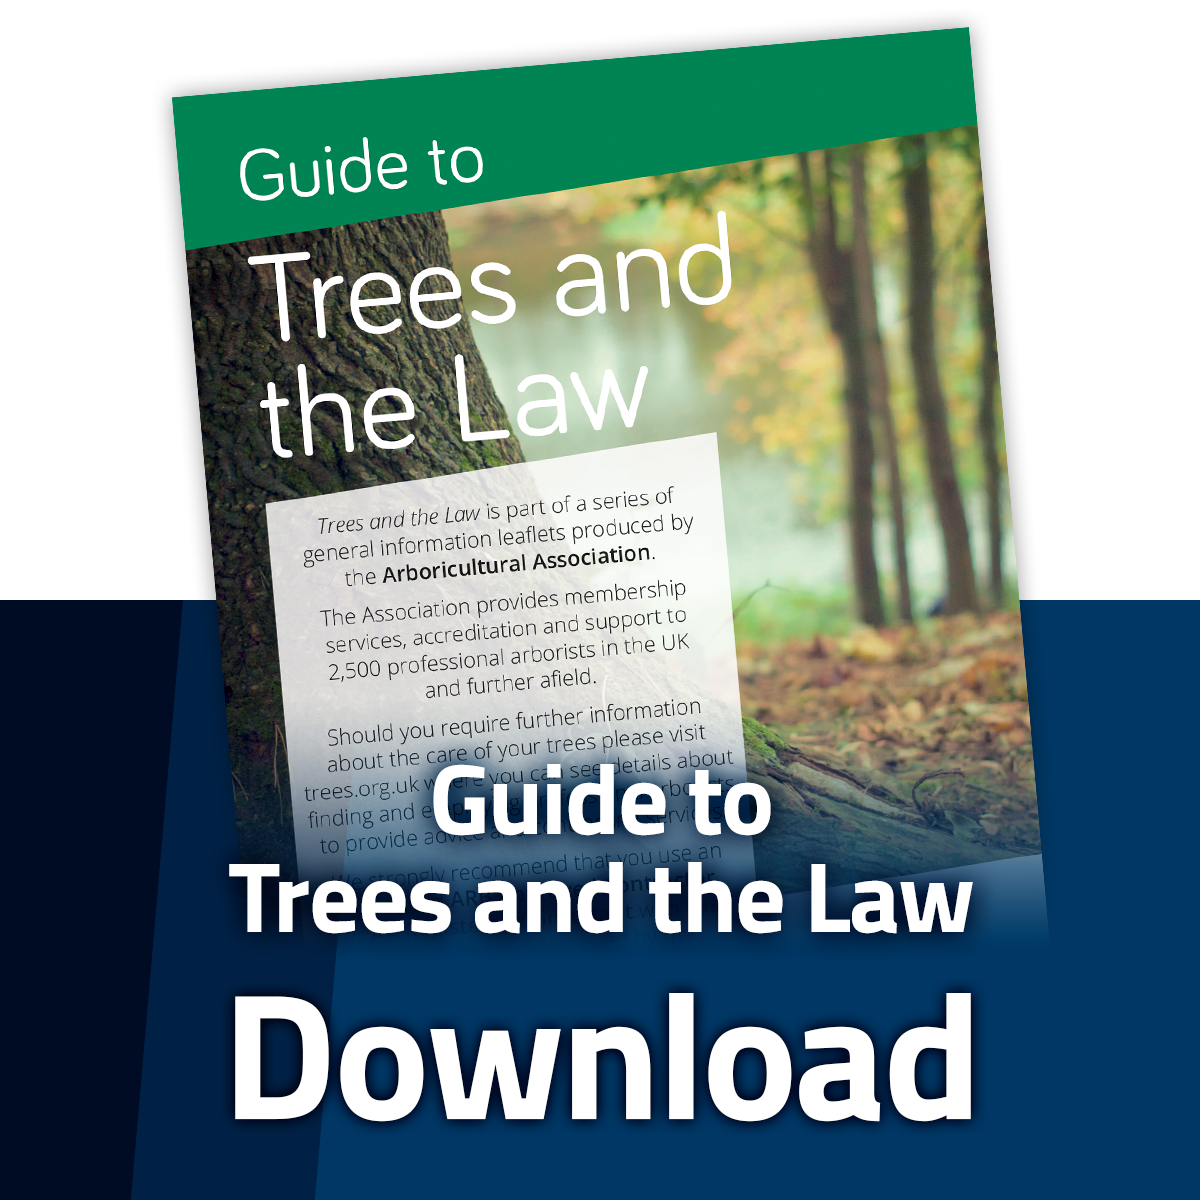 Download the Guide to Trees and the Law Leaflet